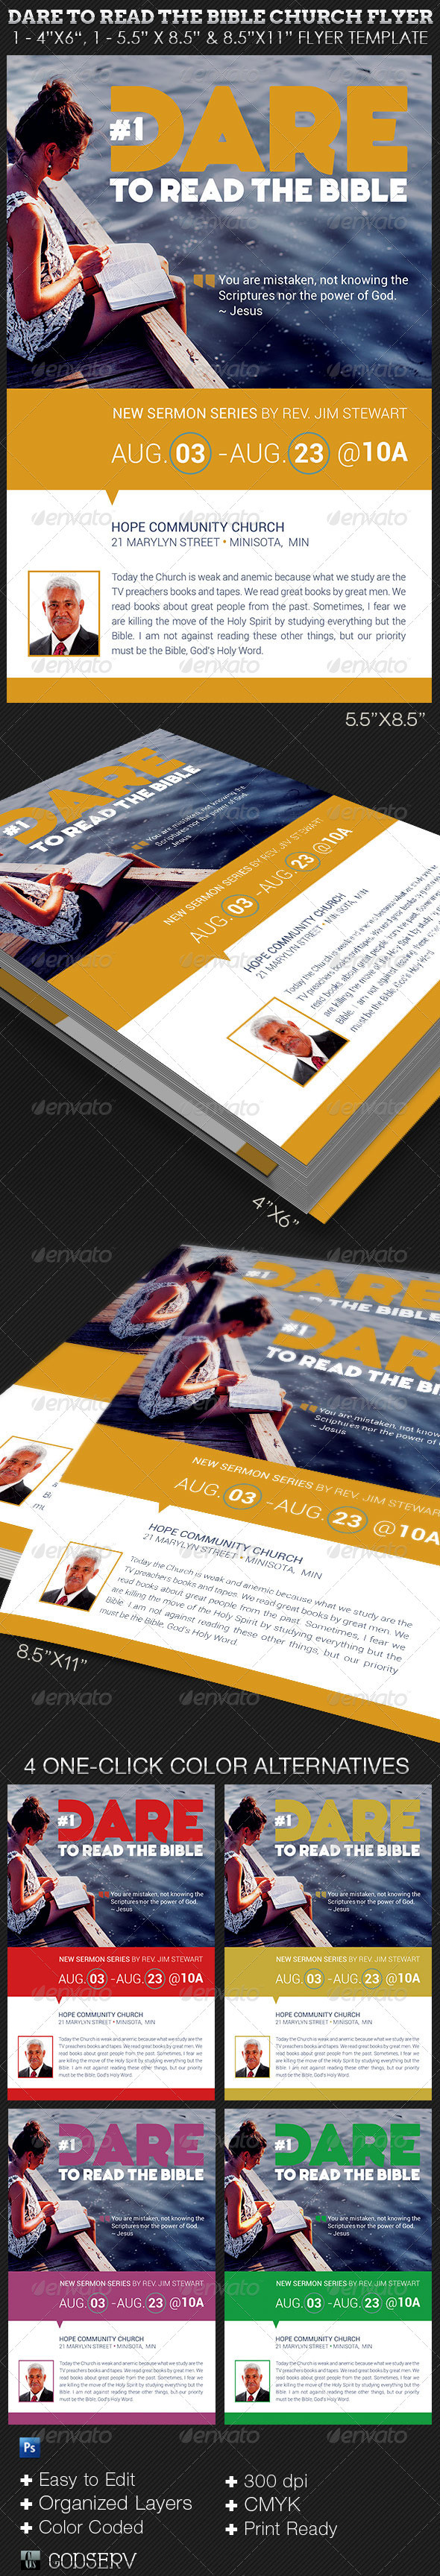 Dare to read the bible church flyer template preview